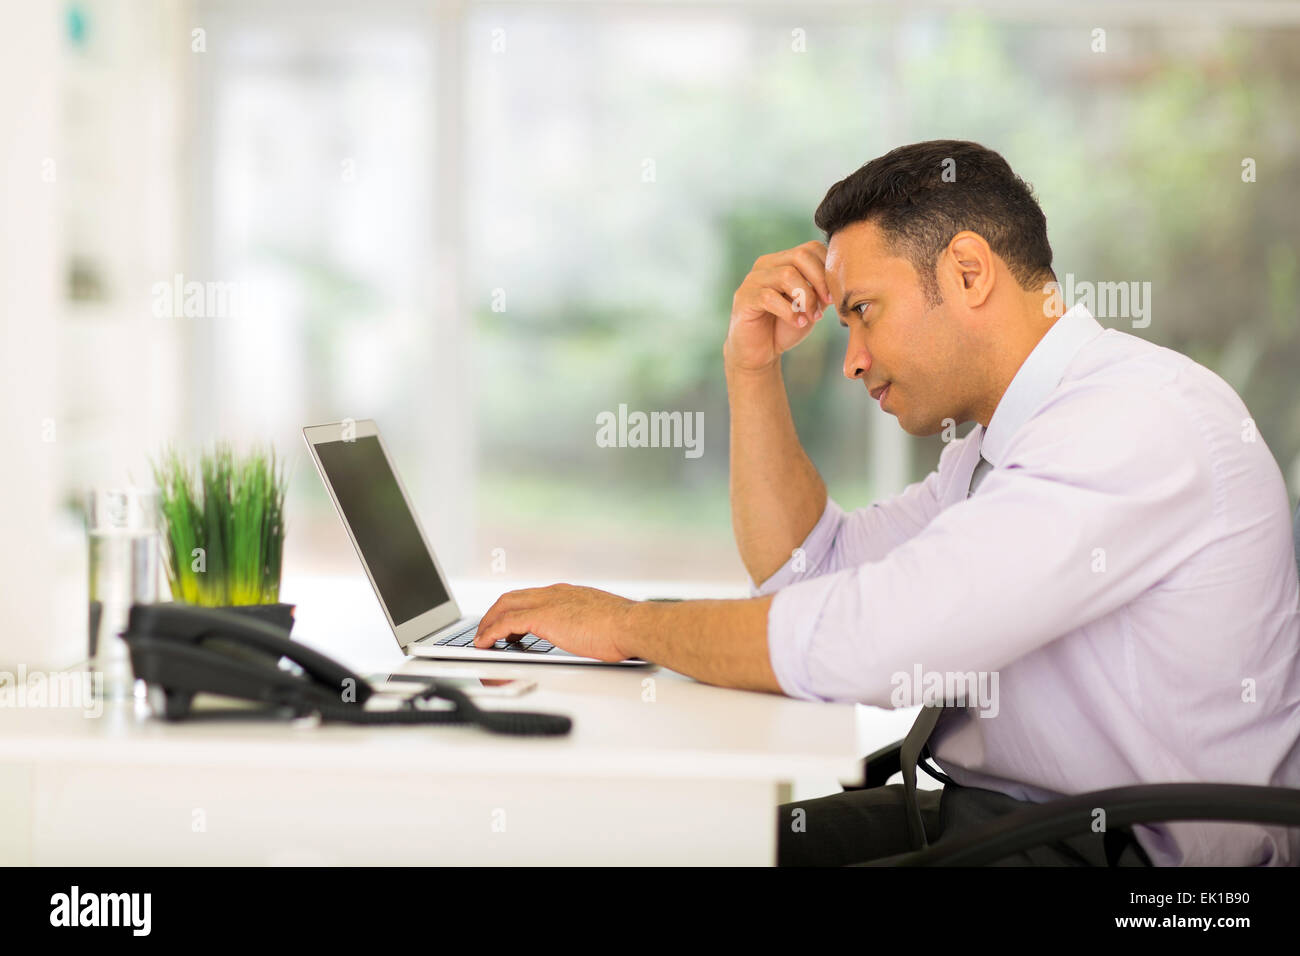 worried middle aged businessman looking at computer screen Stock Photo